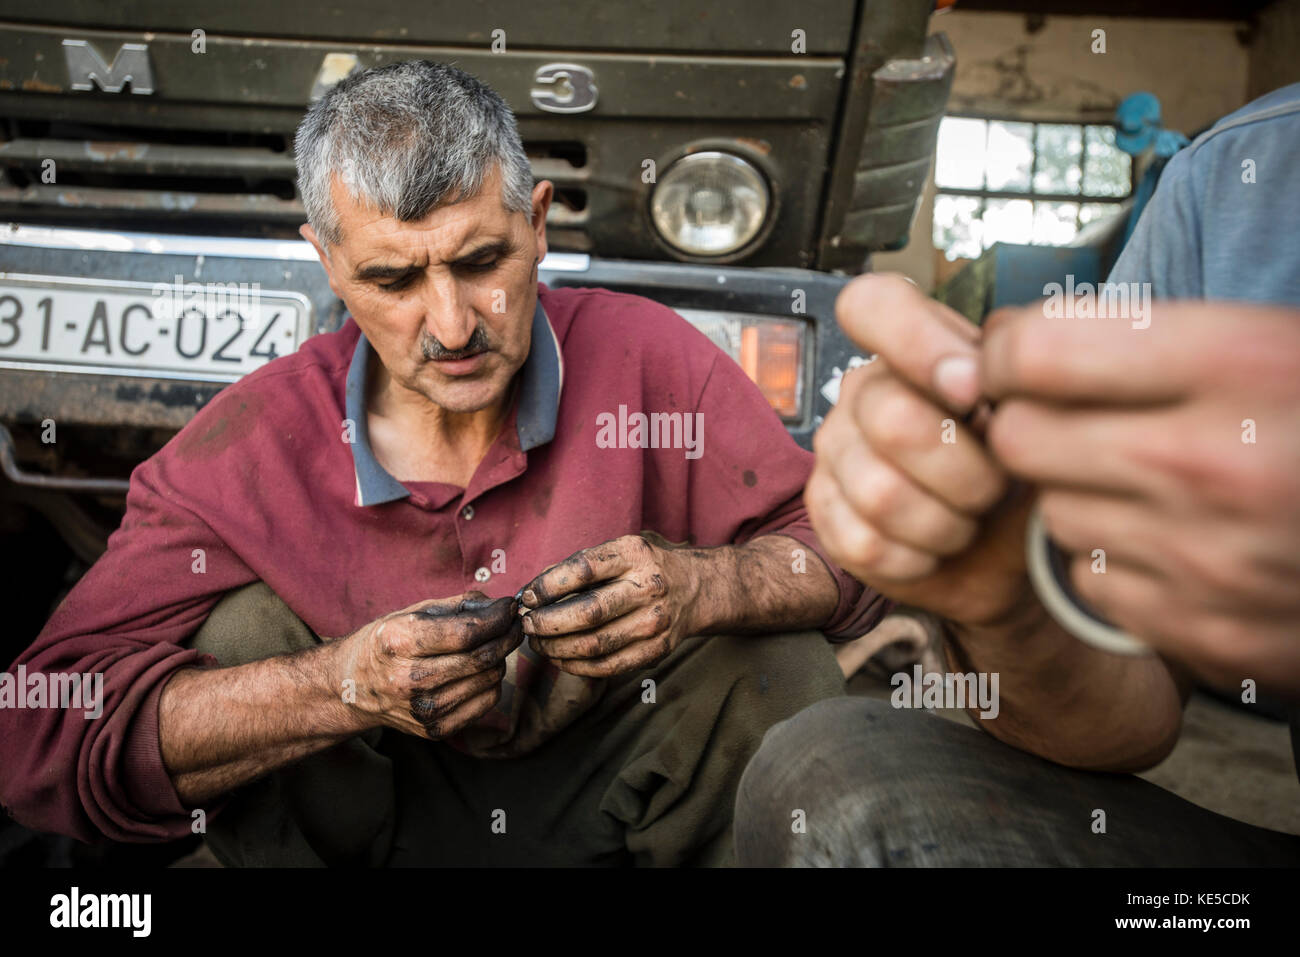 Garage of the Nikitin Kolkhoz at Ivanovka village, Azerbaijan. Workers prepare trucks for grape harvesting. These vehicles deliver grape to Ganja wine factory. Ivanovka is a village with mainly Russian population which maintained the last kolkhoz in Azerbaijan. Stock Photo